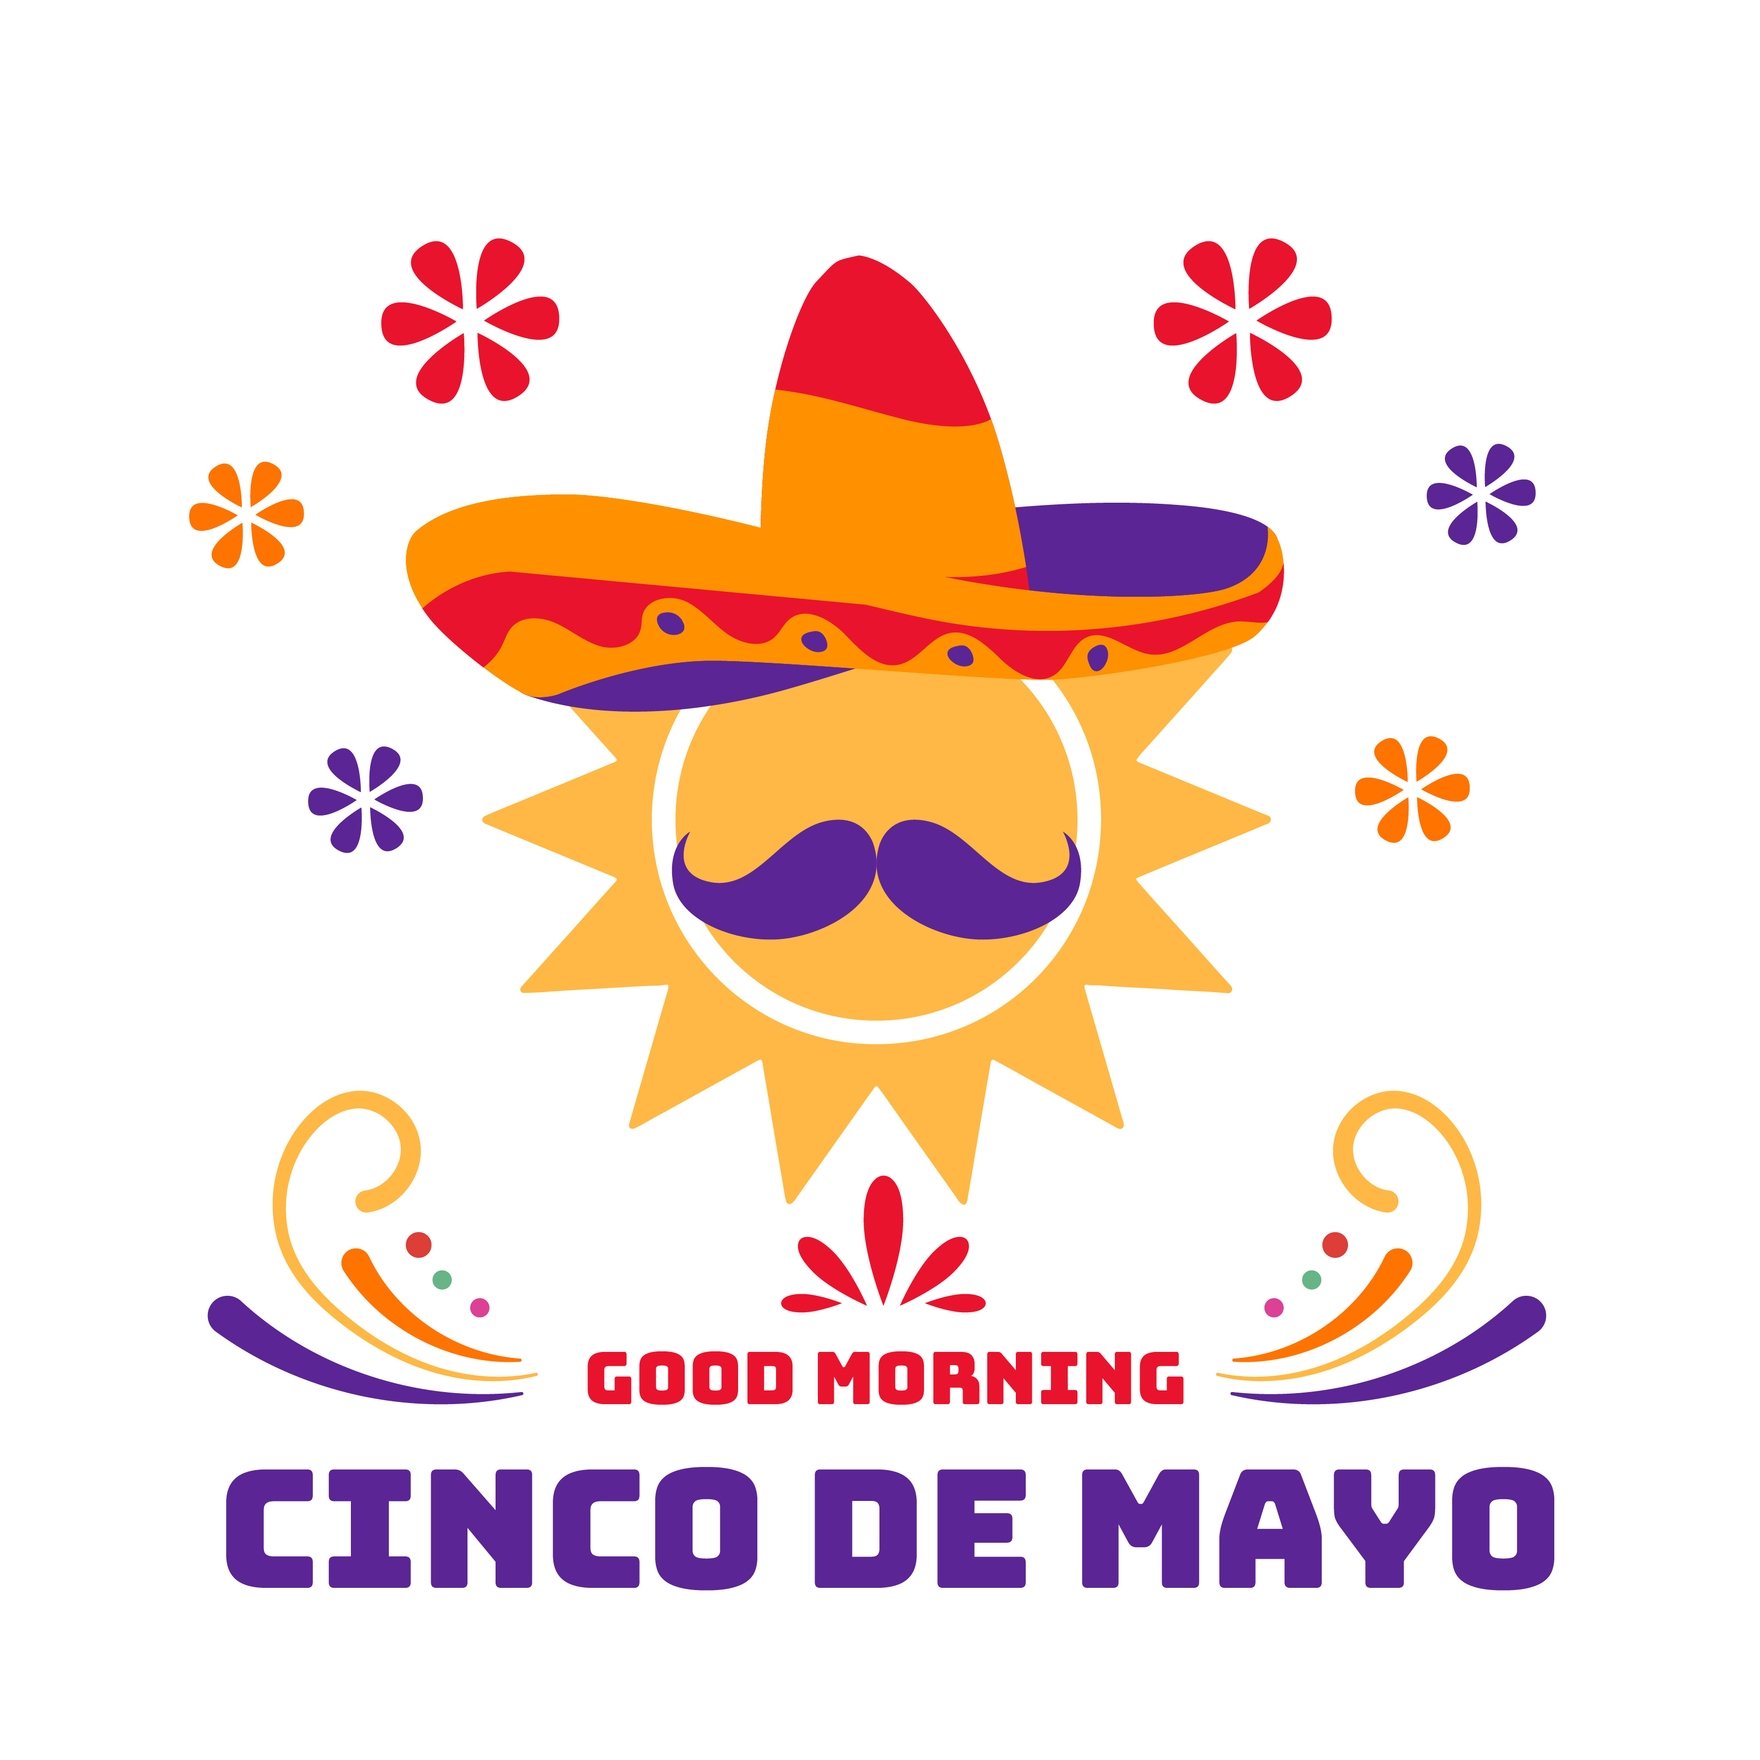 Free Good Morning Cinco de Mayo GIF in Illustrator, EPS, SVG, JPG, GIF, PNG, After Effects